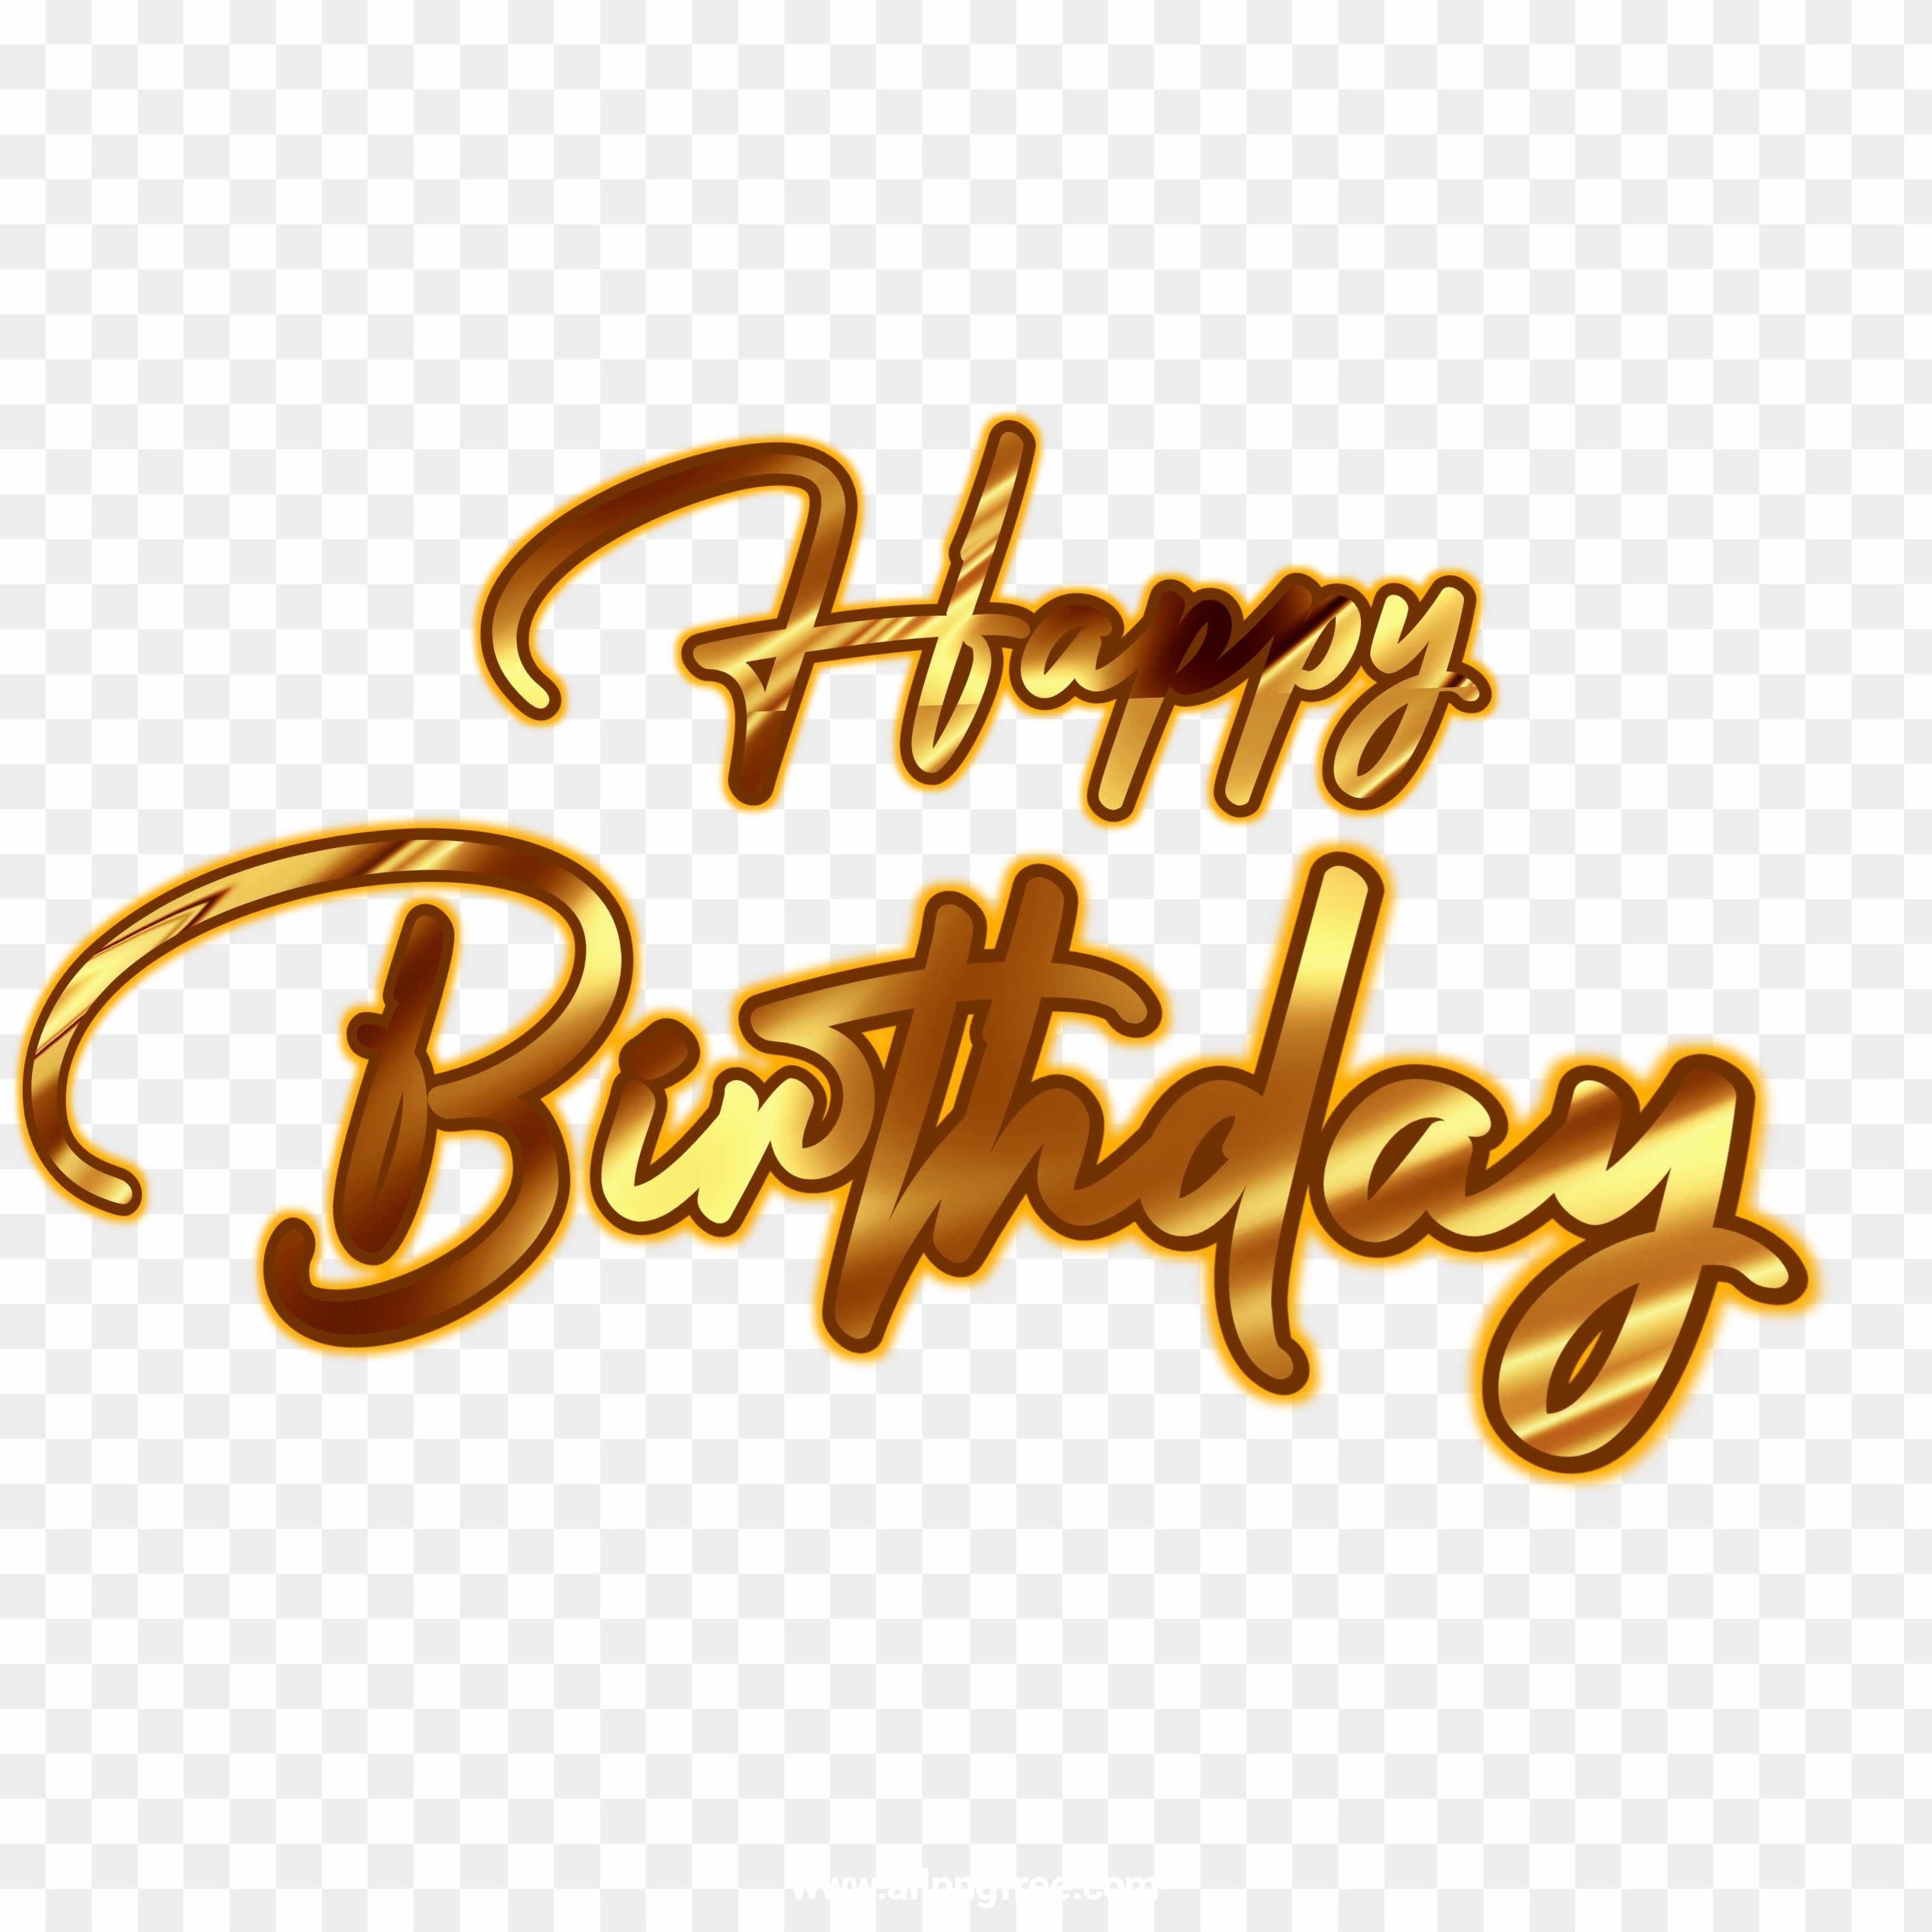 Happy birthday png images 